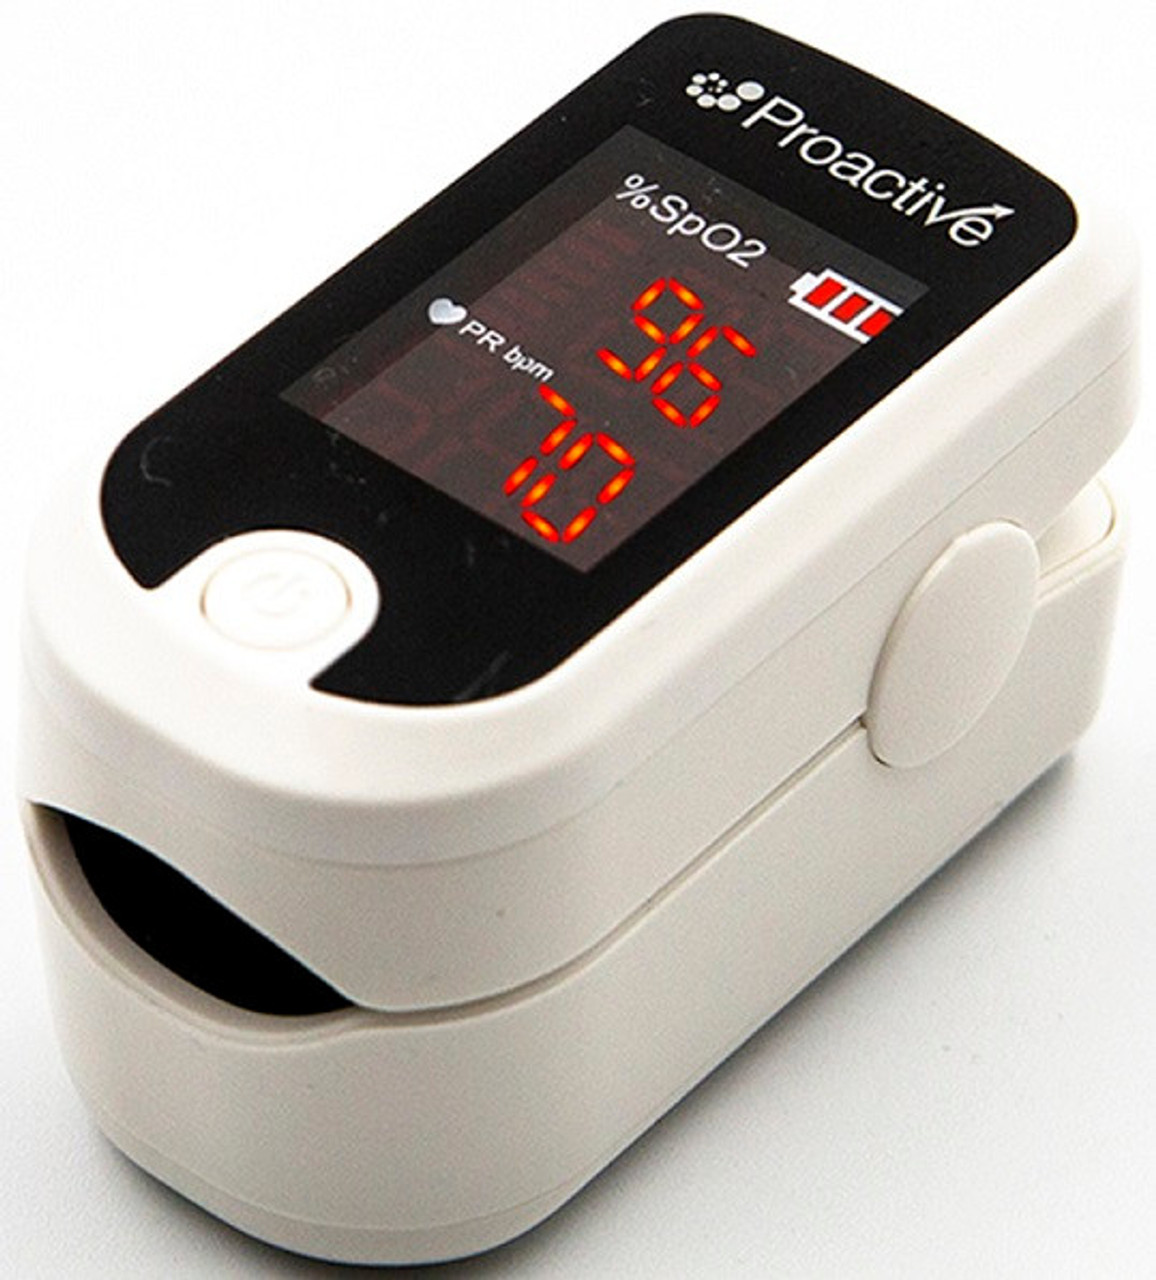 Finger Pulse Oximeter, (SpO2) Blood Oxygen Saturation Monitor with Pulse  Rate Measurements and Pulse Bar Graph, Digital Reading LED Display